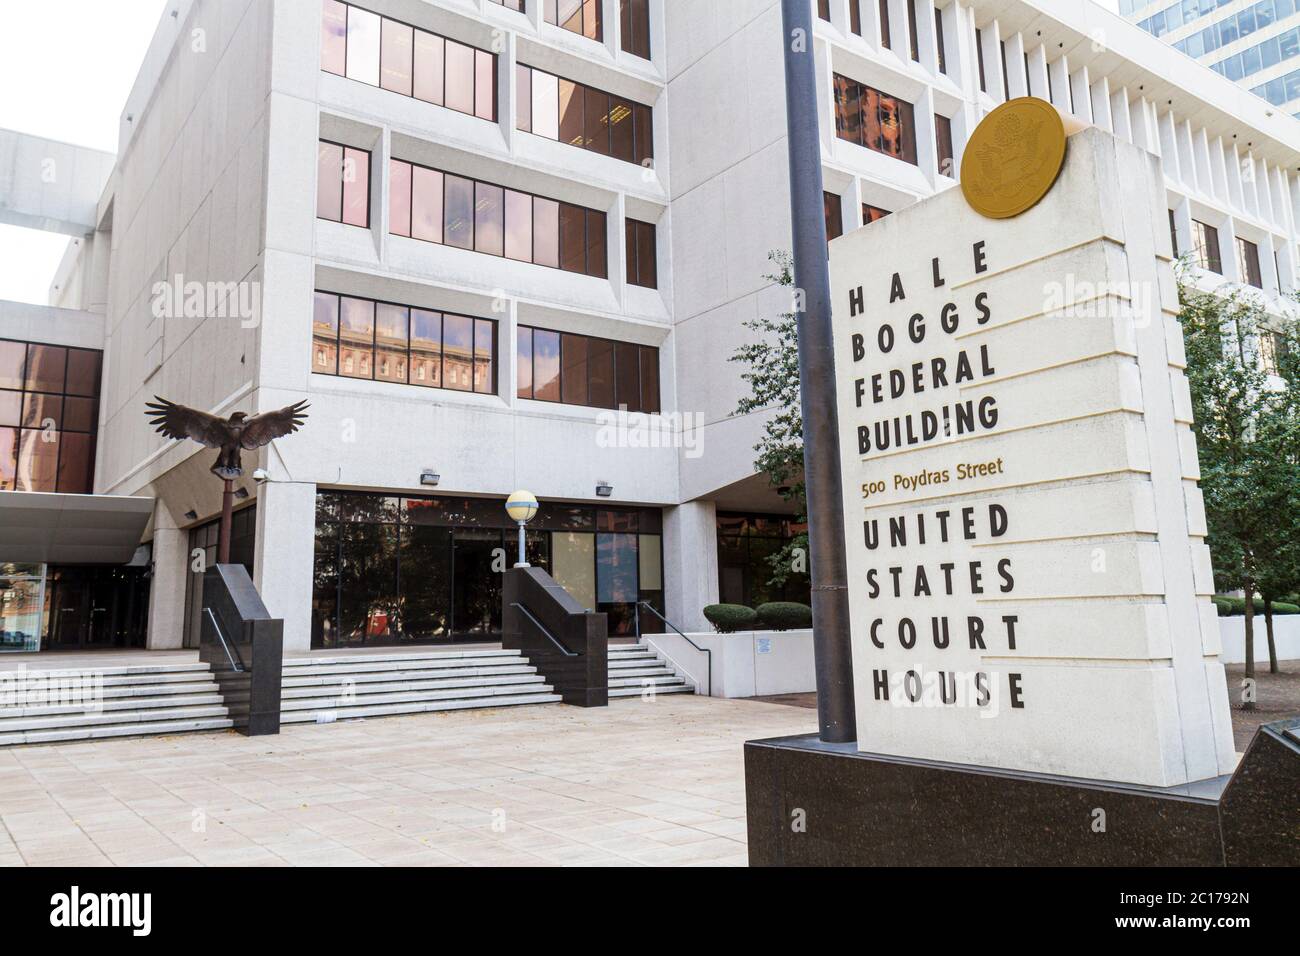 New Orleans Louisiana,Poydras Street,Hale Boggs Federal building government,United States Courthouse entrance outside exterior Stock Photo